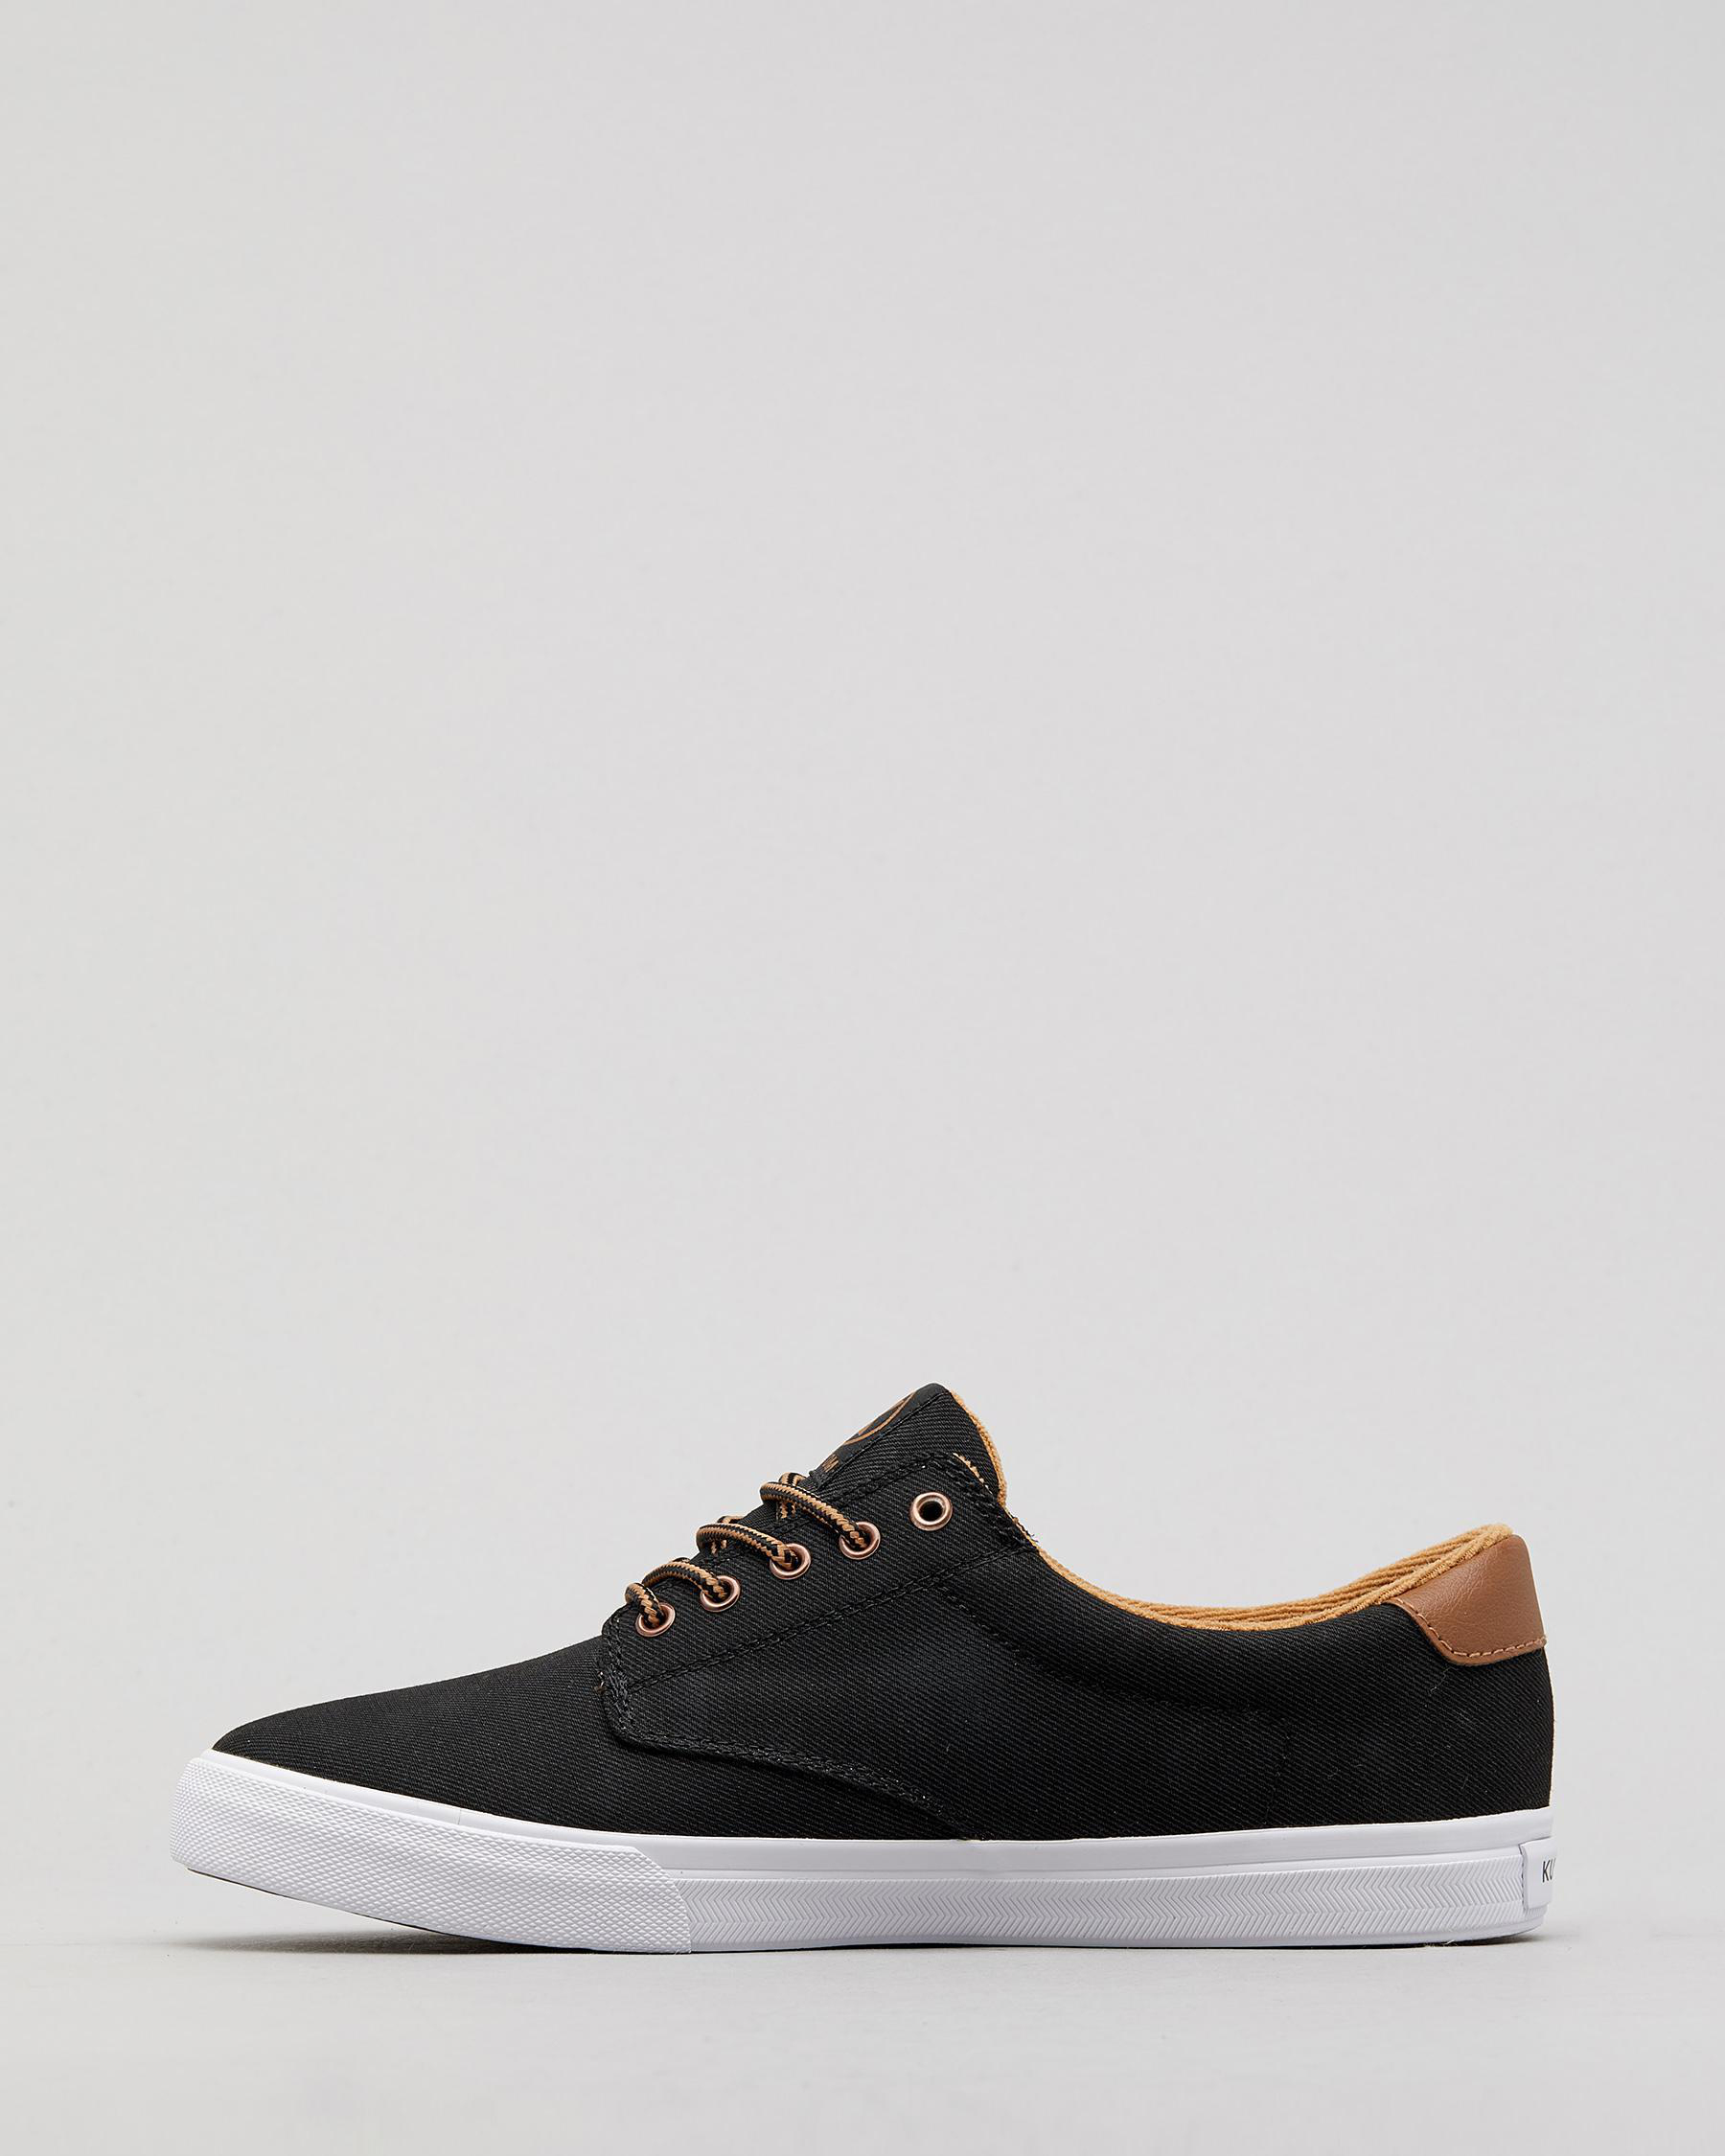 Shop Kustom Profile Shoes In Black Brown - Fast Shipping & Easy Returns ...